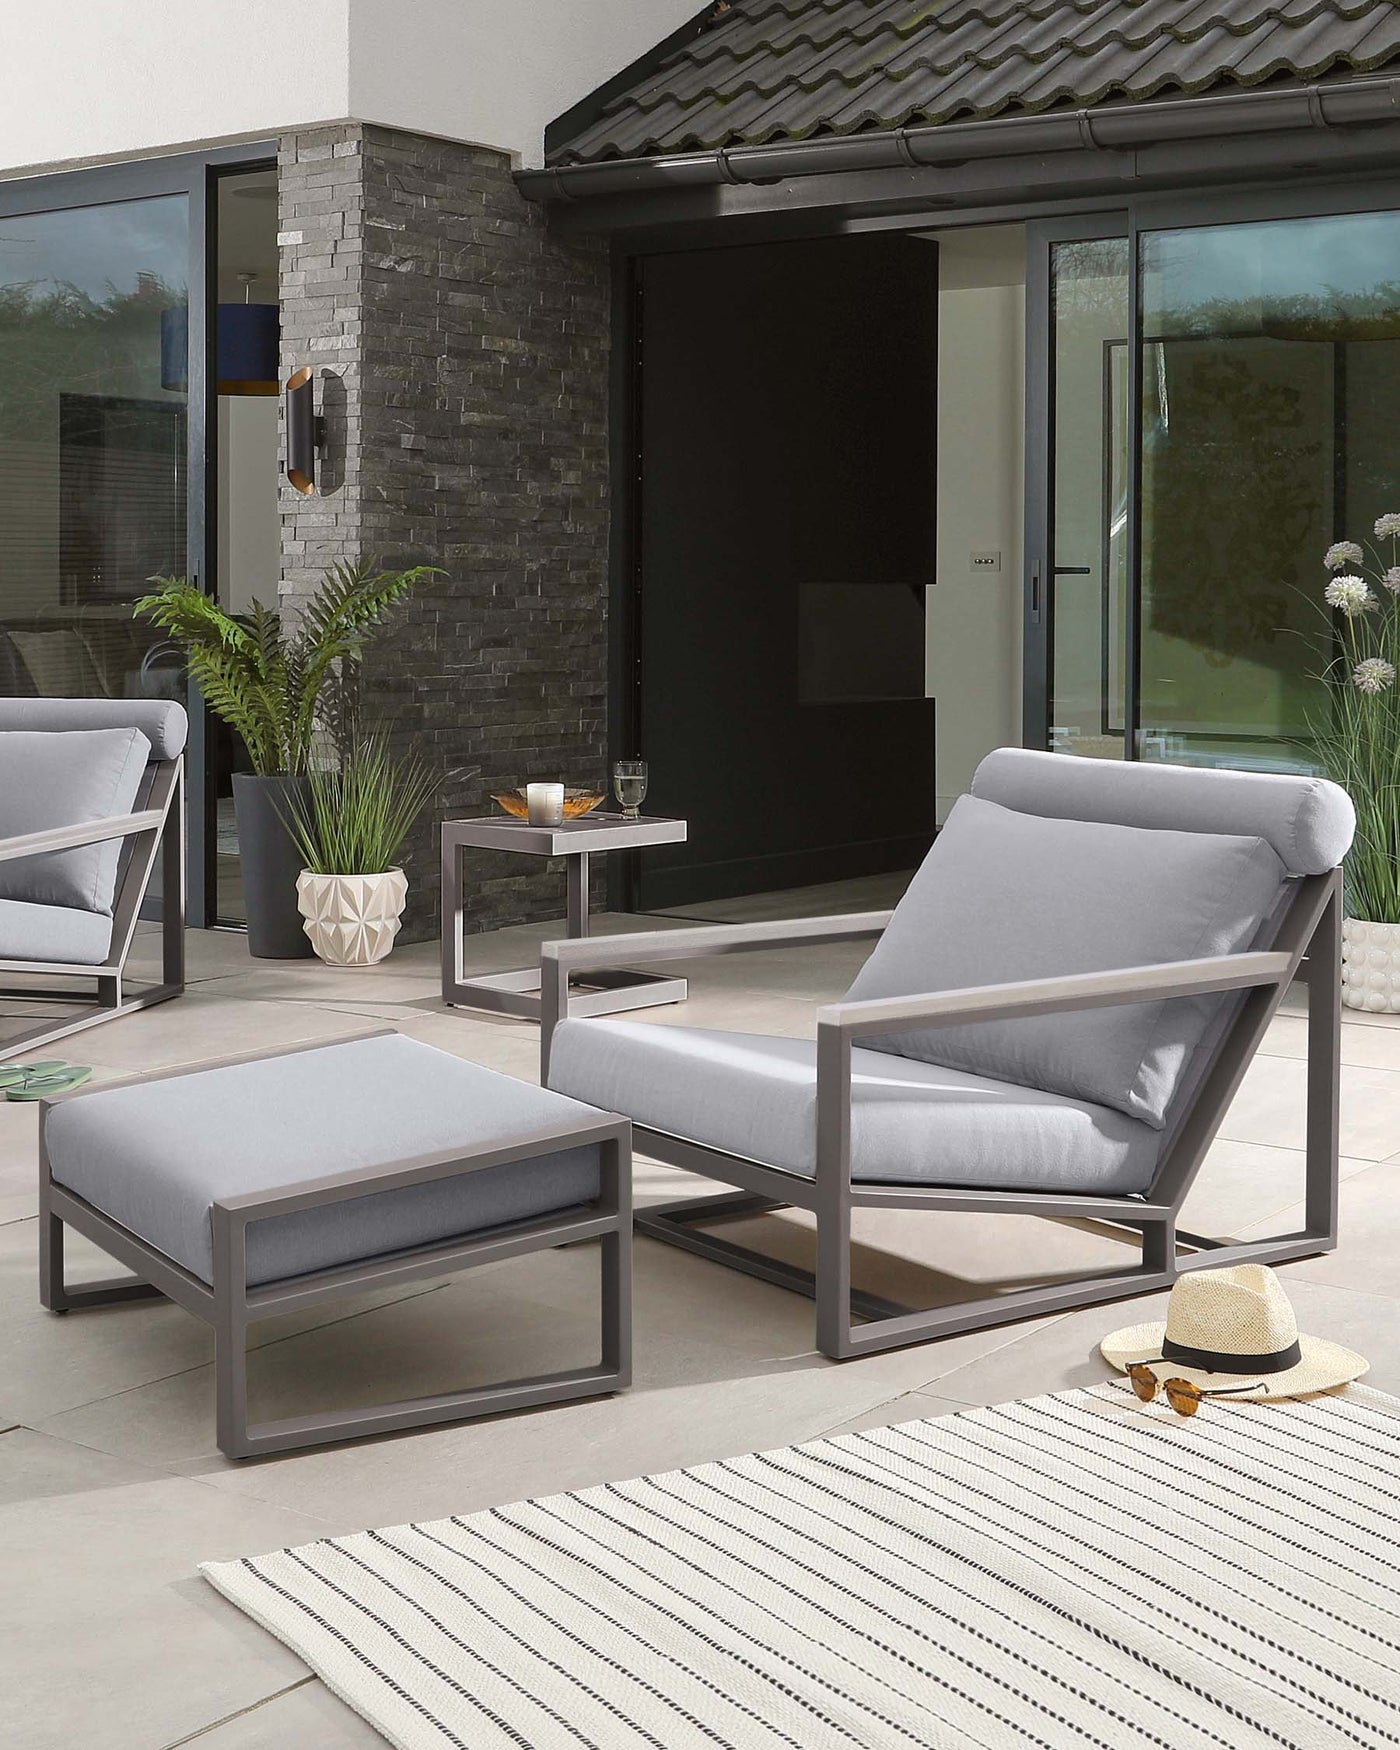 Modern outdoor furniture set with sleek grey metal frames, including two armchairs with comfortable light grey cushions, a matching rectangular side table, and a square ottoman also with a light grey cushion, arranged on a patio area with a striped area rug.